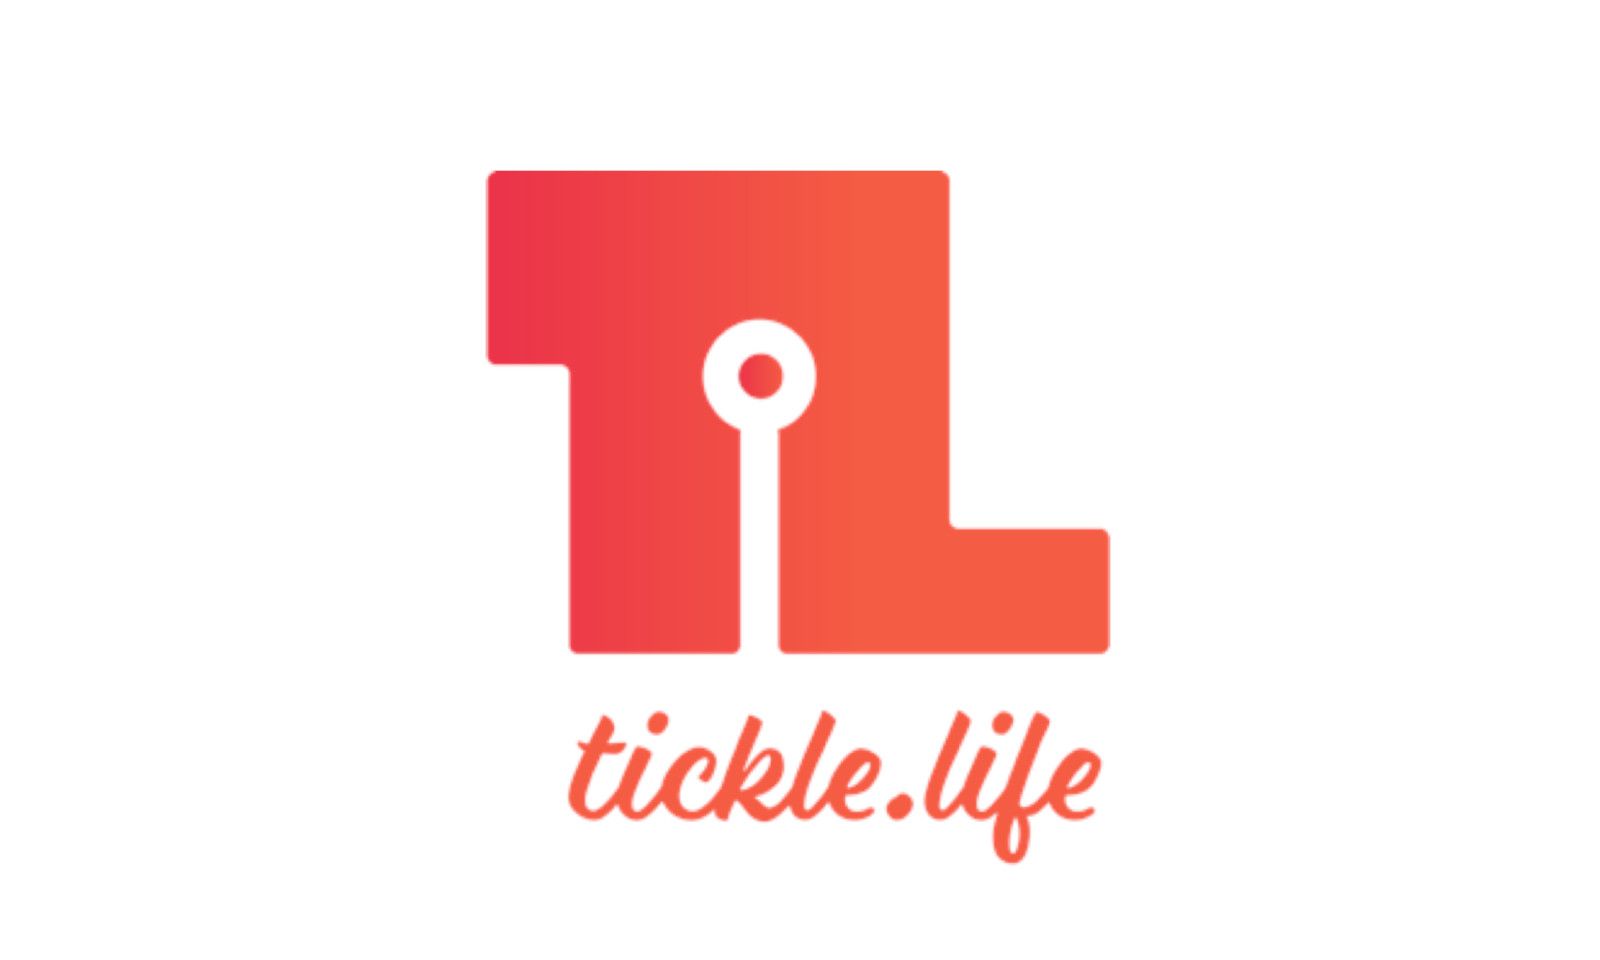 Tickle.Life Launches 'Carnal Chemistry' NFT Art Project